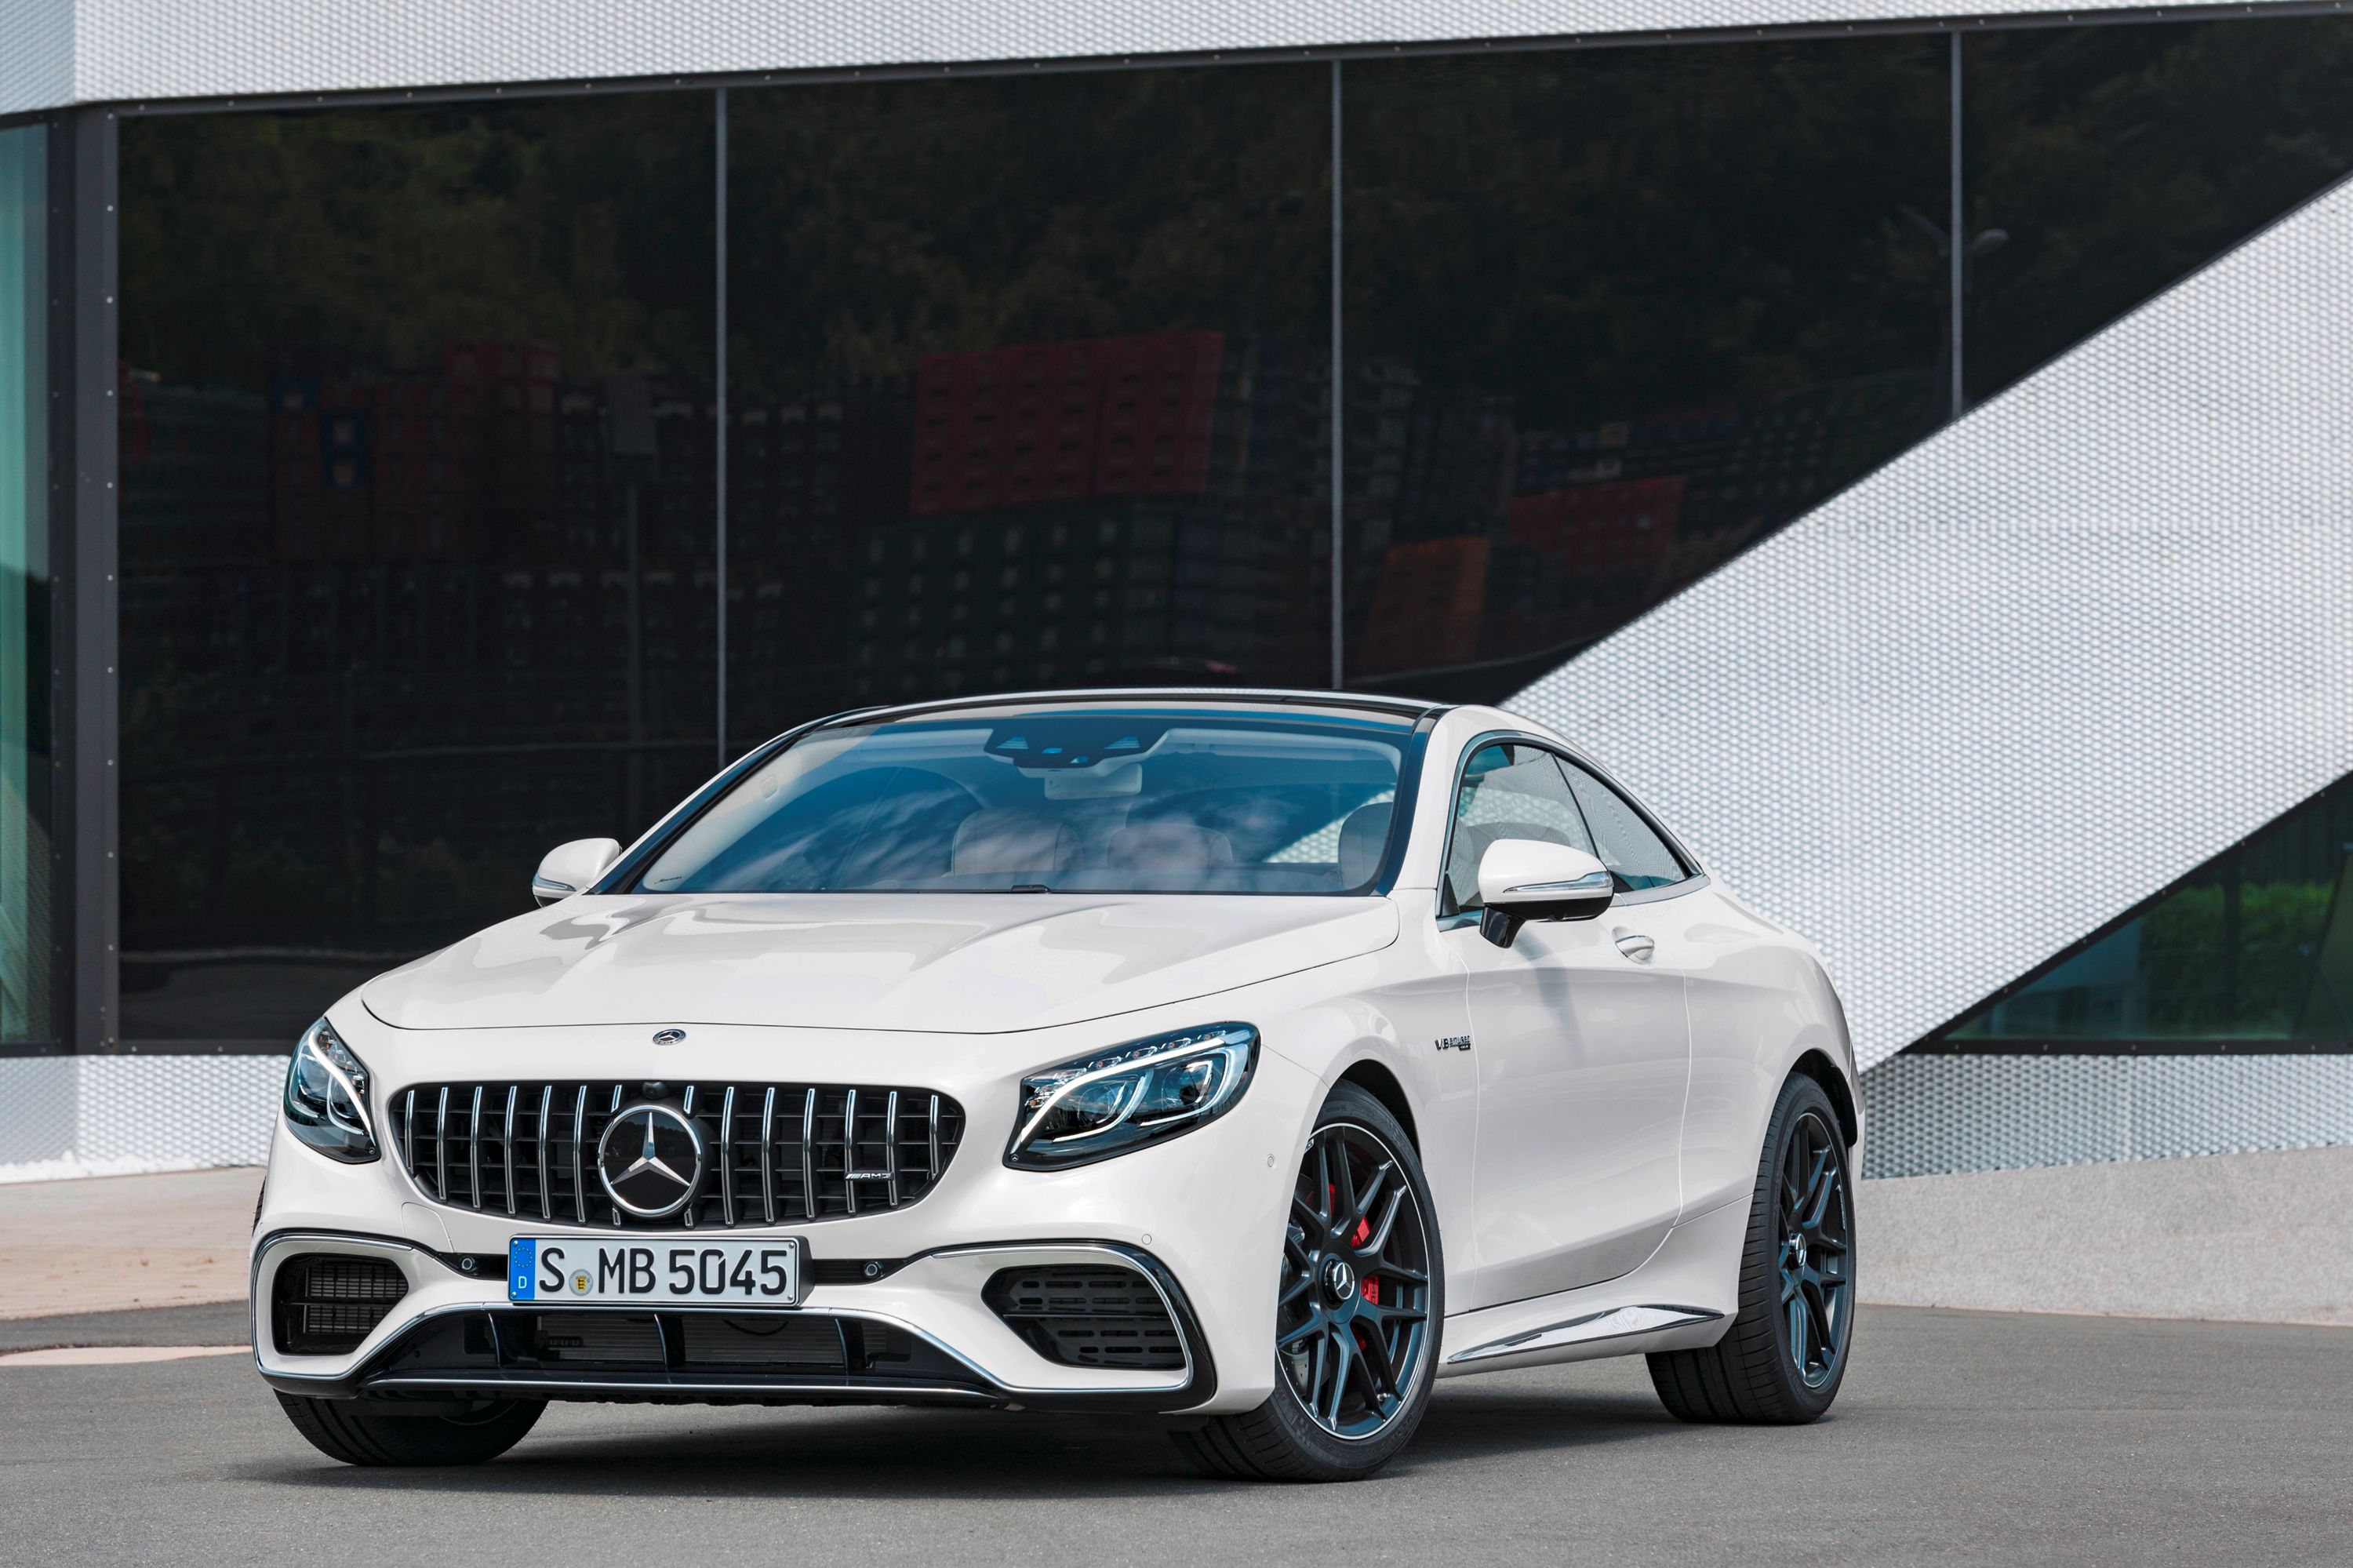 2021 Mercedes-AMG S63 Coupe